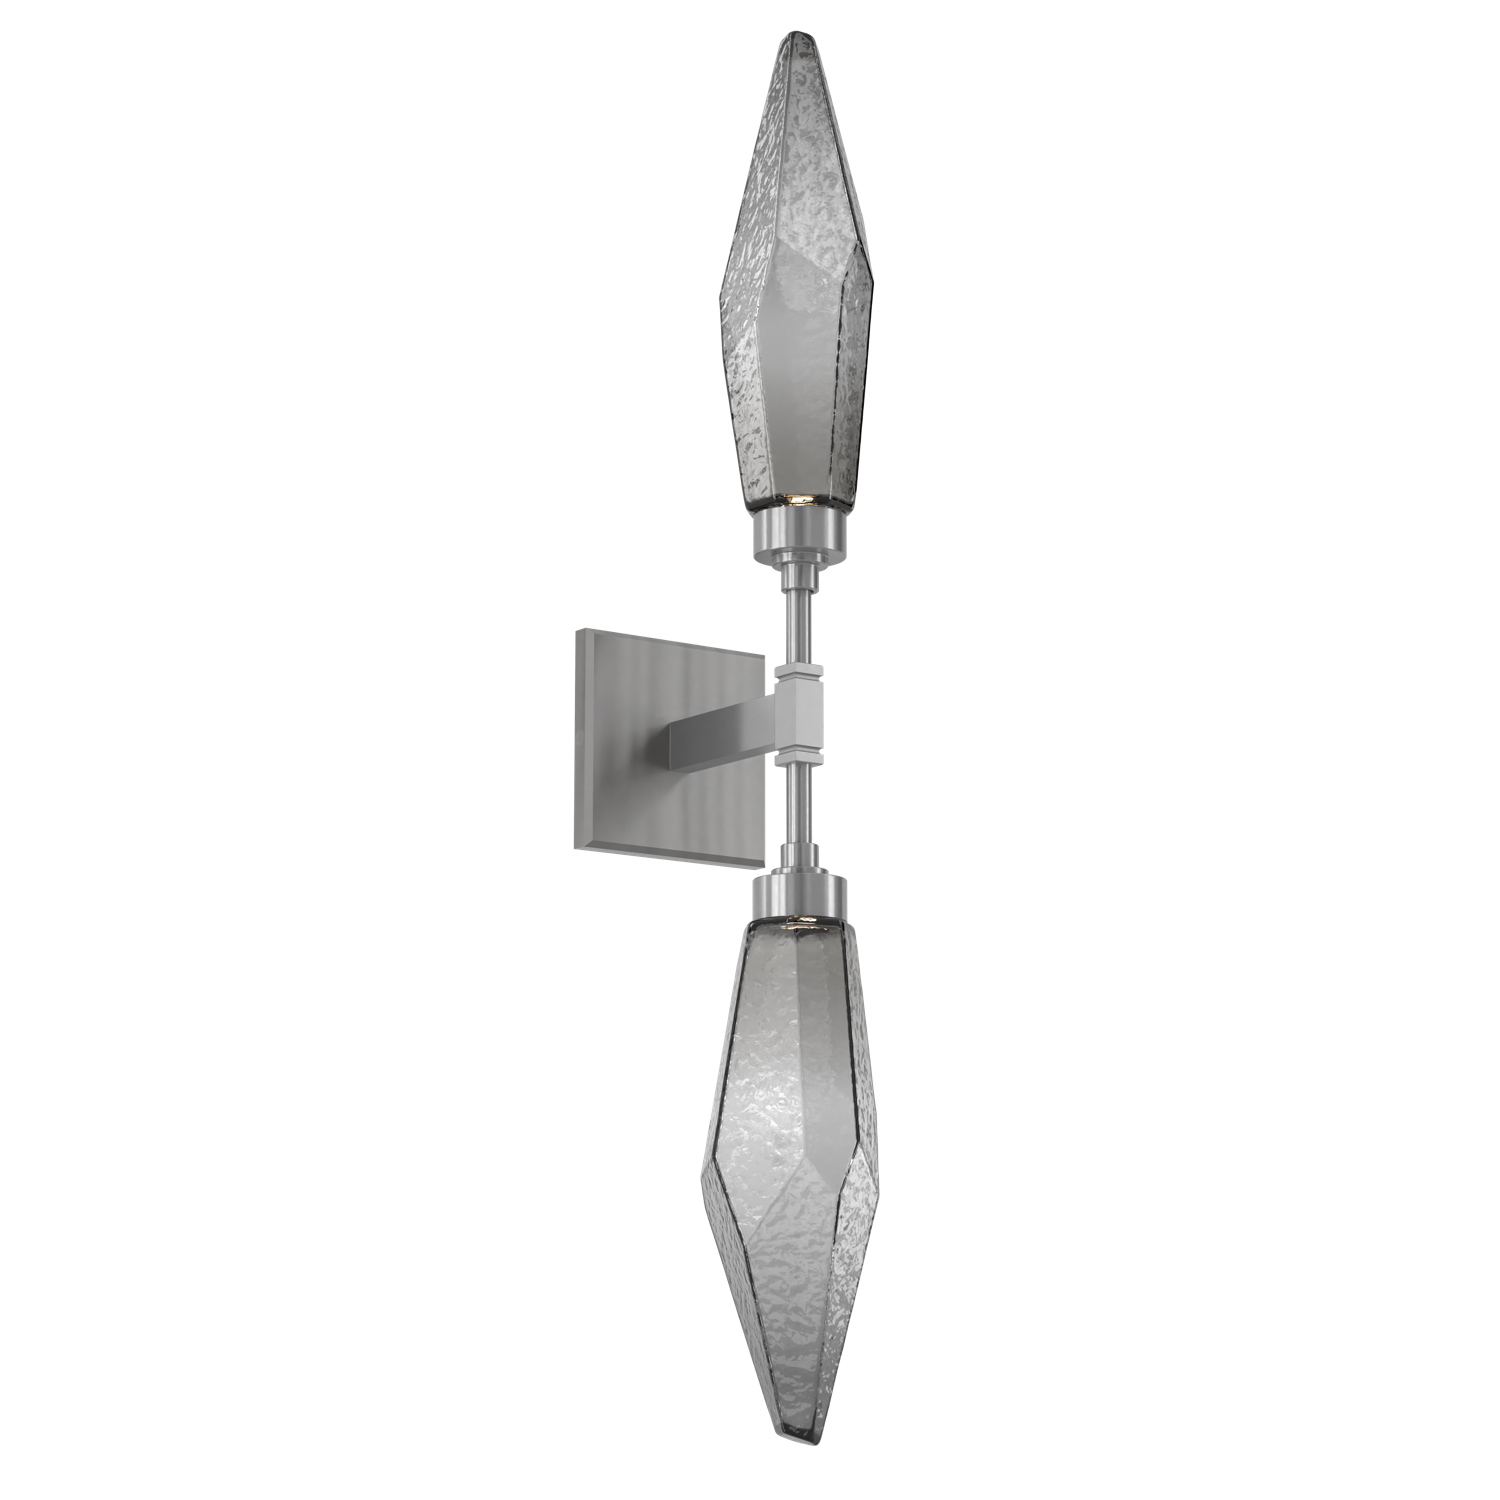 IDB0050-02-GM-CS-Hammerton-Studio-Rock-Crystal-wall-sconce-with-gunmetal-finish-and-chilled-smoke-glass-shades-and-LED-lamping